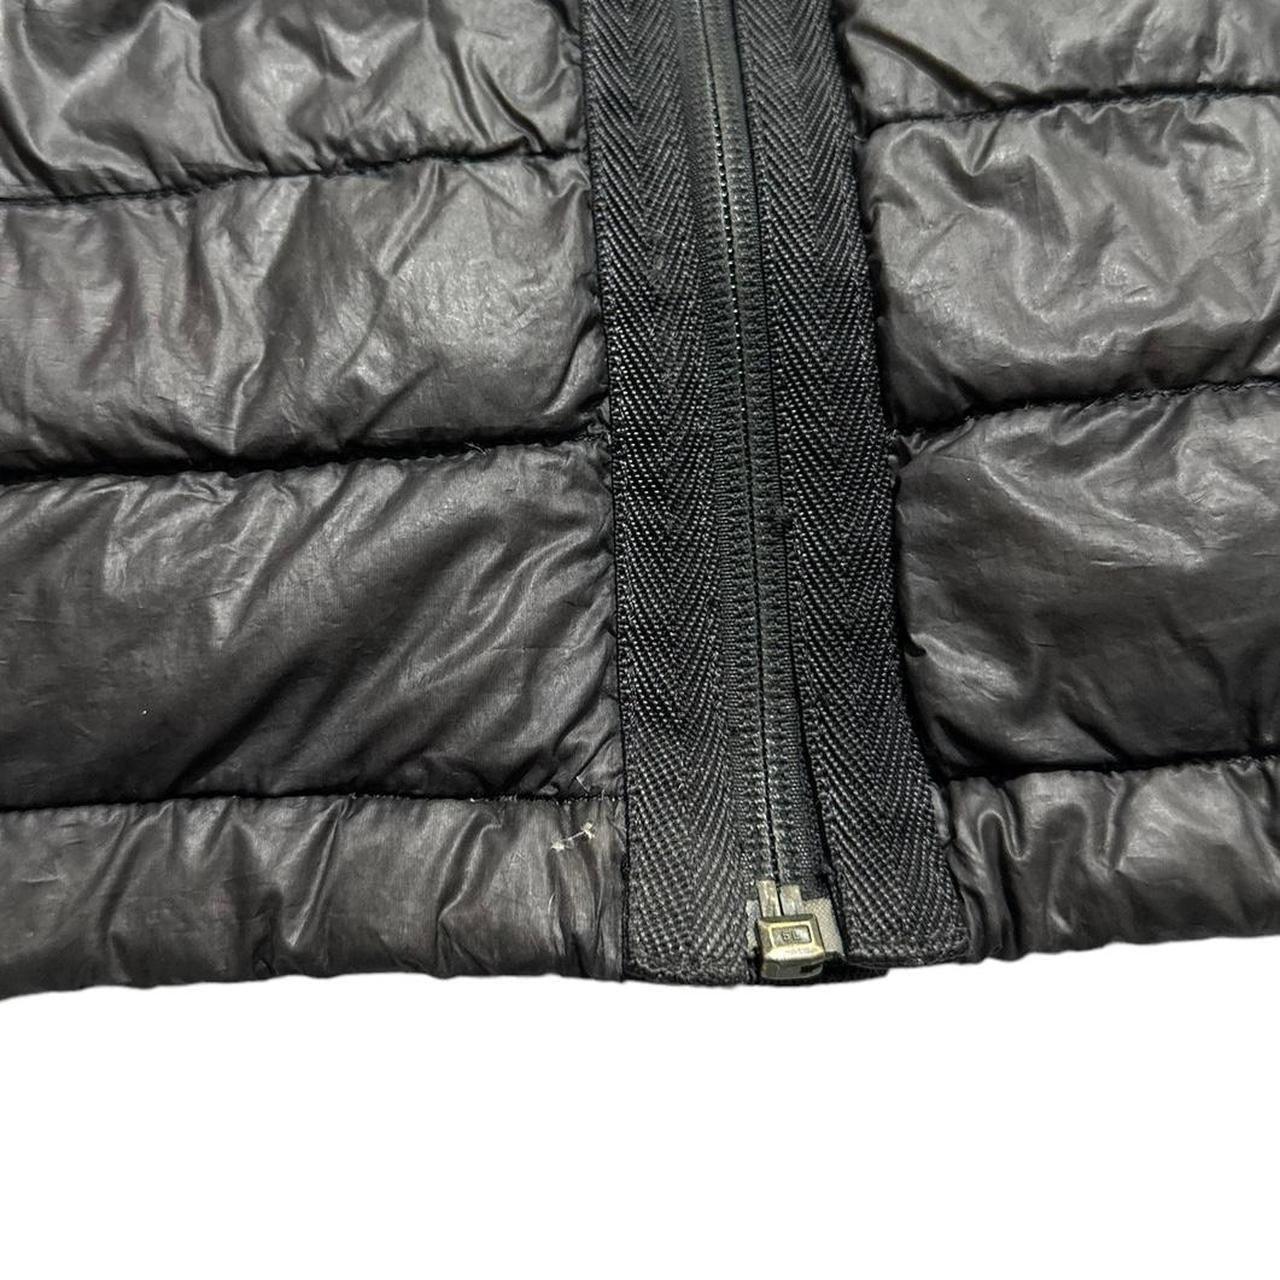 Stone Island Garment Dyed Down Gilet - Known Source